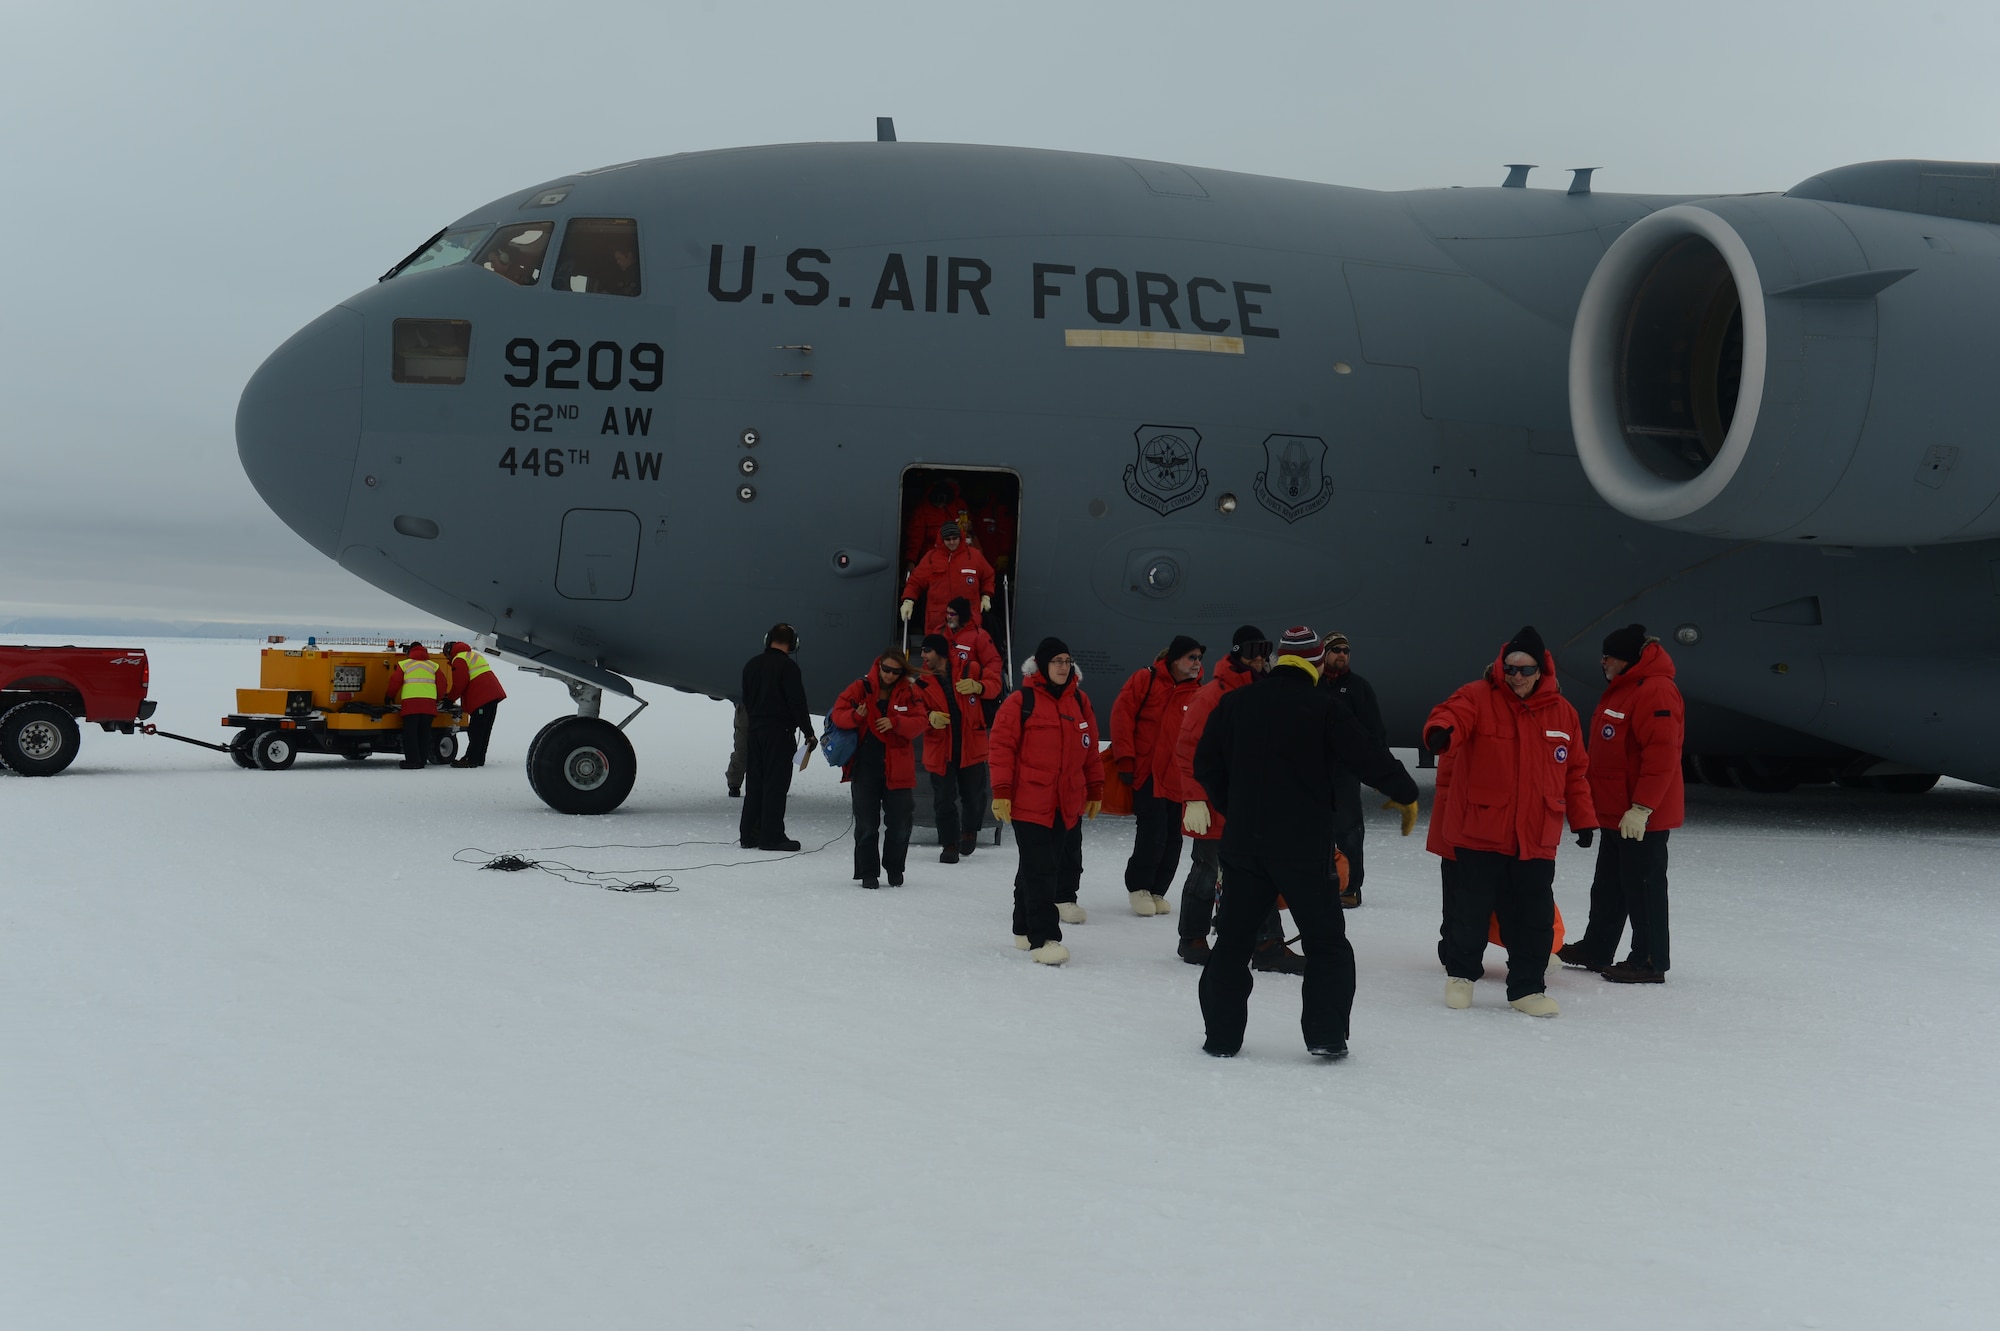 Passengers depart a C-17 Globemaster III, Oct. 8th, 2014, after landing at McMurdo Station, Antarctica. More than 60 passengers were onboard the flight which included a helicopter as part of the cargo. (U.S. Air Force photo/Master Sgt. Todd Wivell)